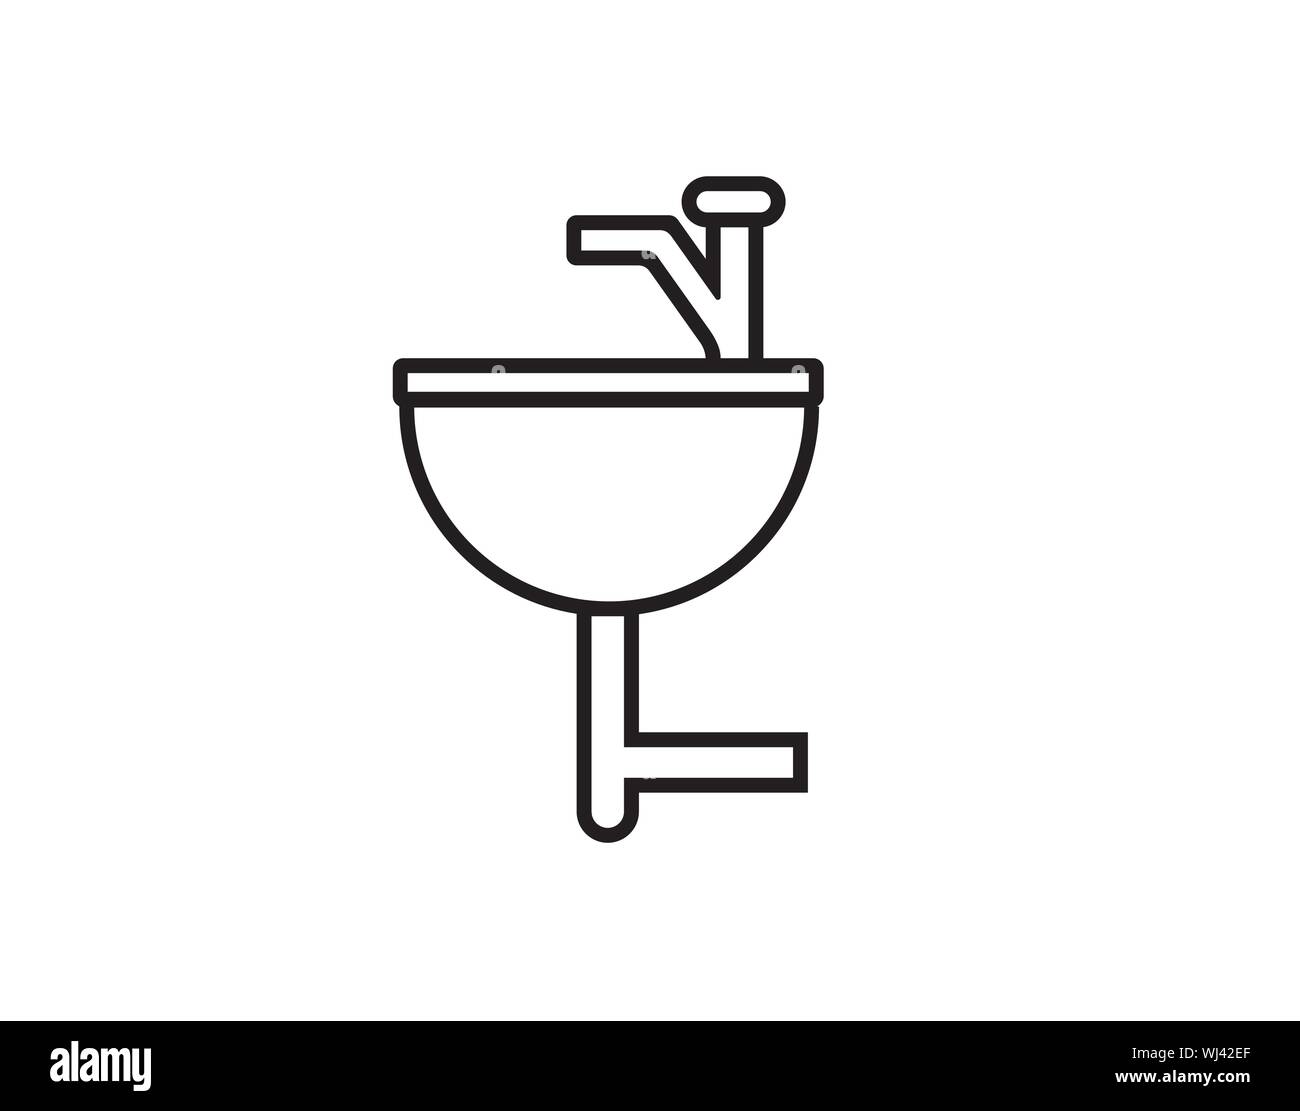 Sink line icon linear concept outline vector image Stock Vector